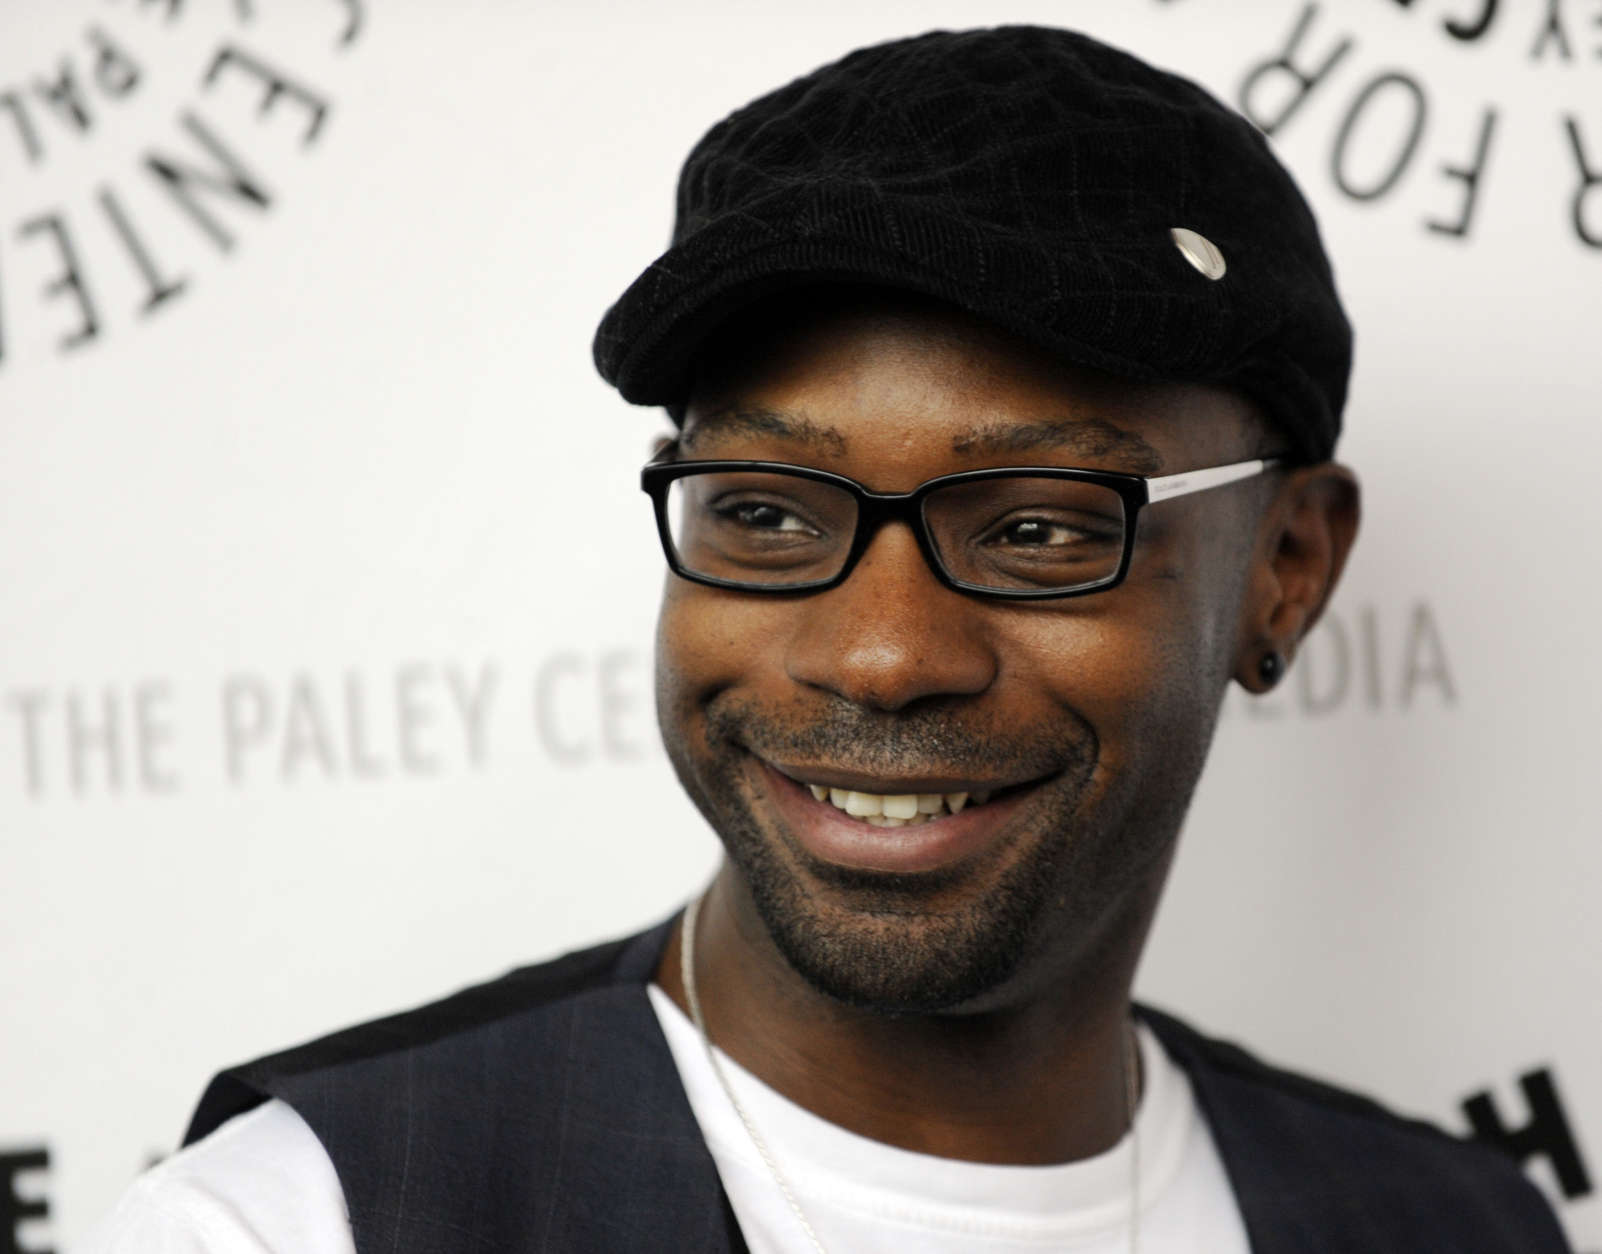 Nelsan Ellis, a cast member in the HBO series "True Blood," poses at The Paley Center for Media's Paleyfest 09 in Los Angeles, Monday, April 13, 2009. (AP Photo/Chris Pizzello)